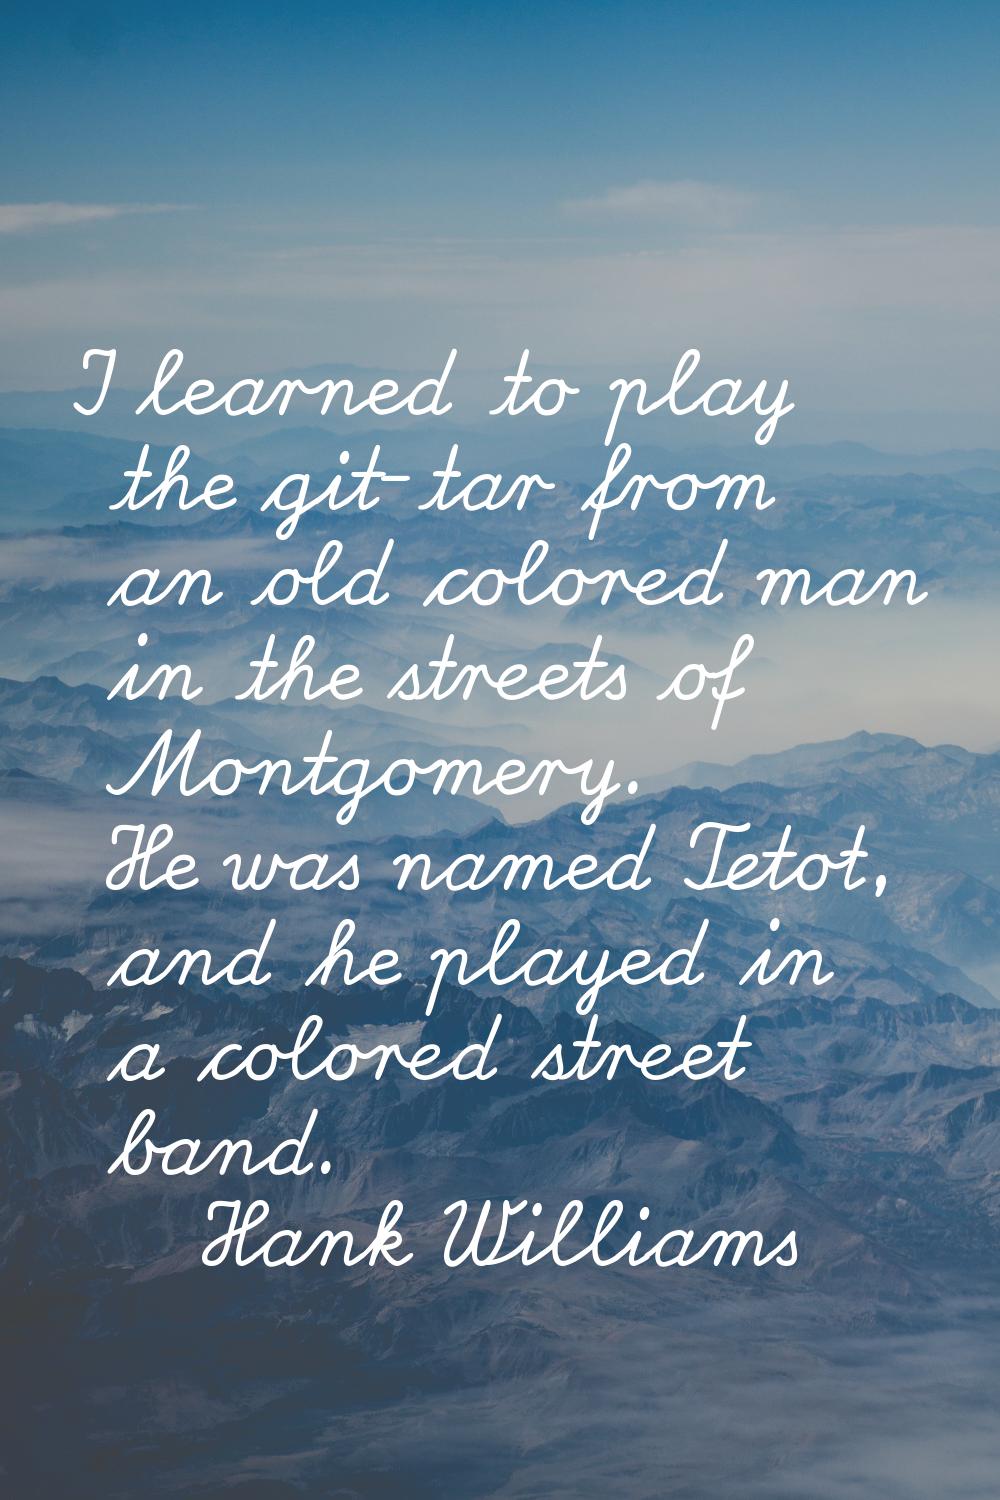 I learned to play the git-tar from an old colored man in the streets of Montgomery. He was named Te